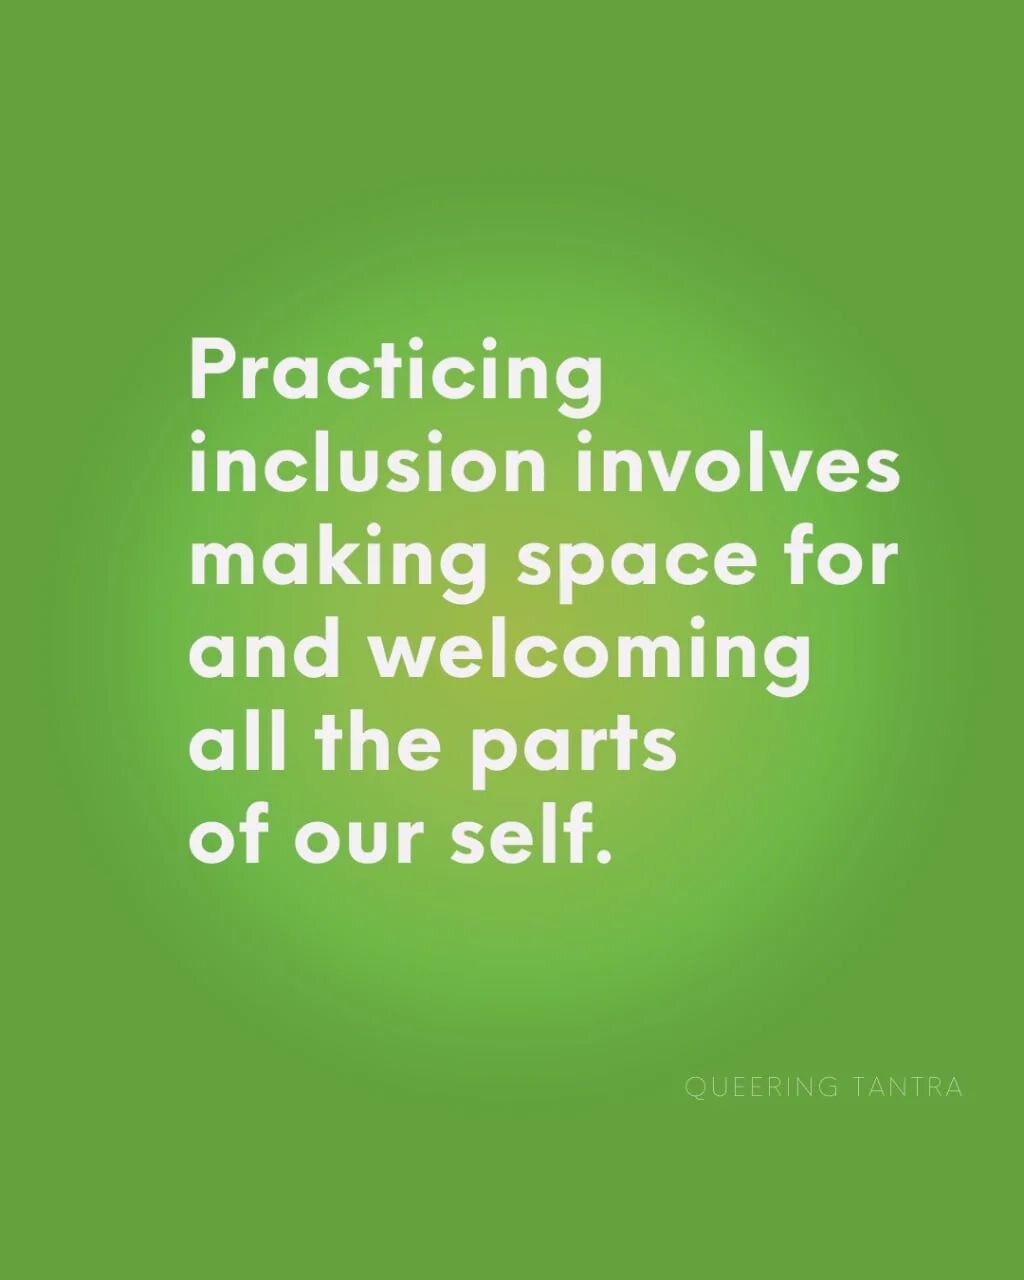 Whether creating more inclusive spaces for a diverse range of folks, or honoring and integrating the various parts of our own selves, inclusion is a powerful spiritual practice. 

Drawing on tantric teachings, we believe that we are both the one and 